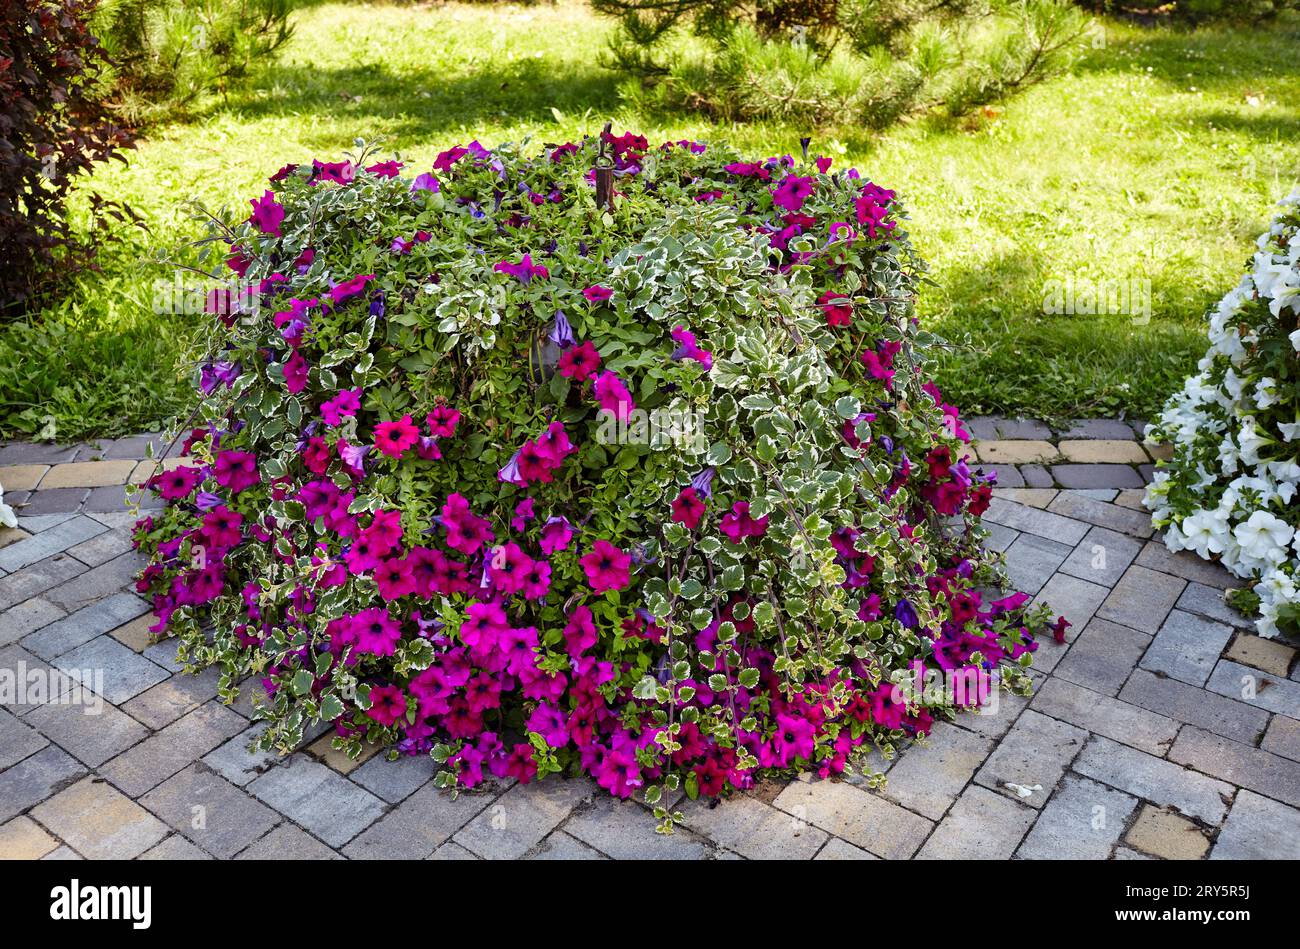 Petunias and Plectranthus (White Edged Swedish Ivy) in city garden. Lush blooming colorful common garden flowers in city park. Selective focus Stock Photo